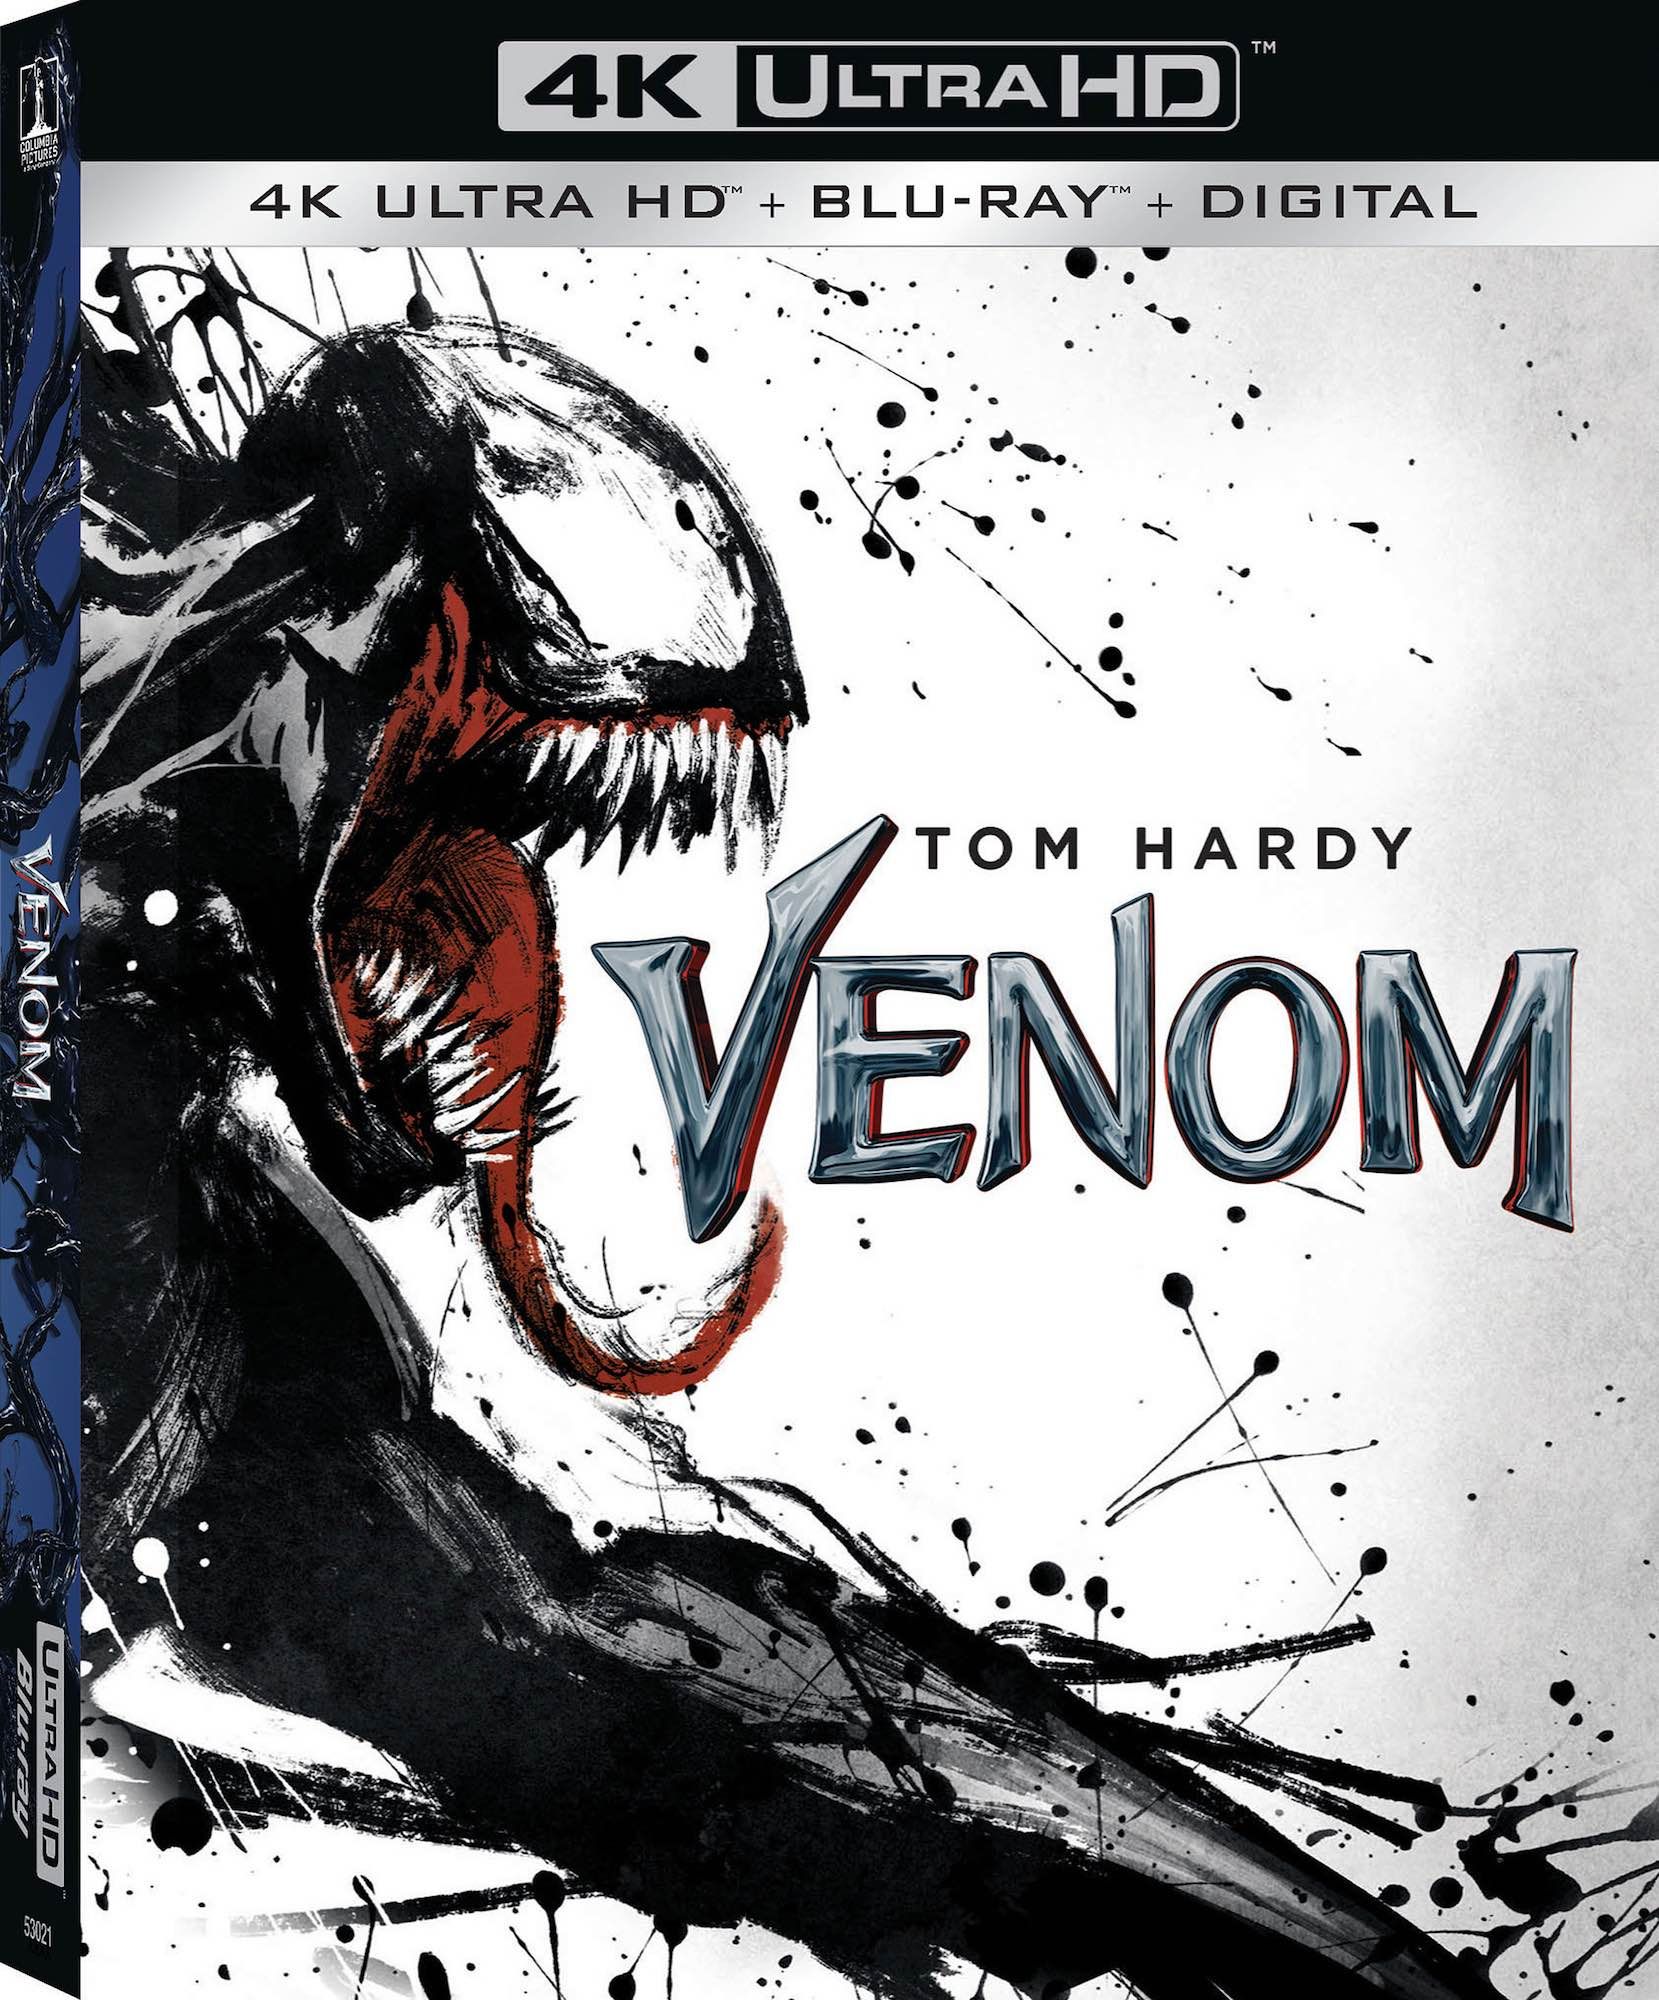 Venom Reimagined As Holiday RomCom In Official Bluray Trailer